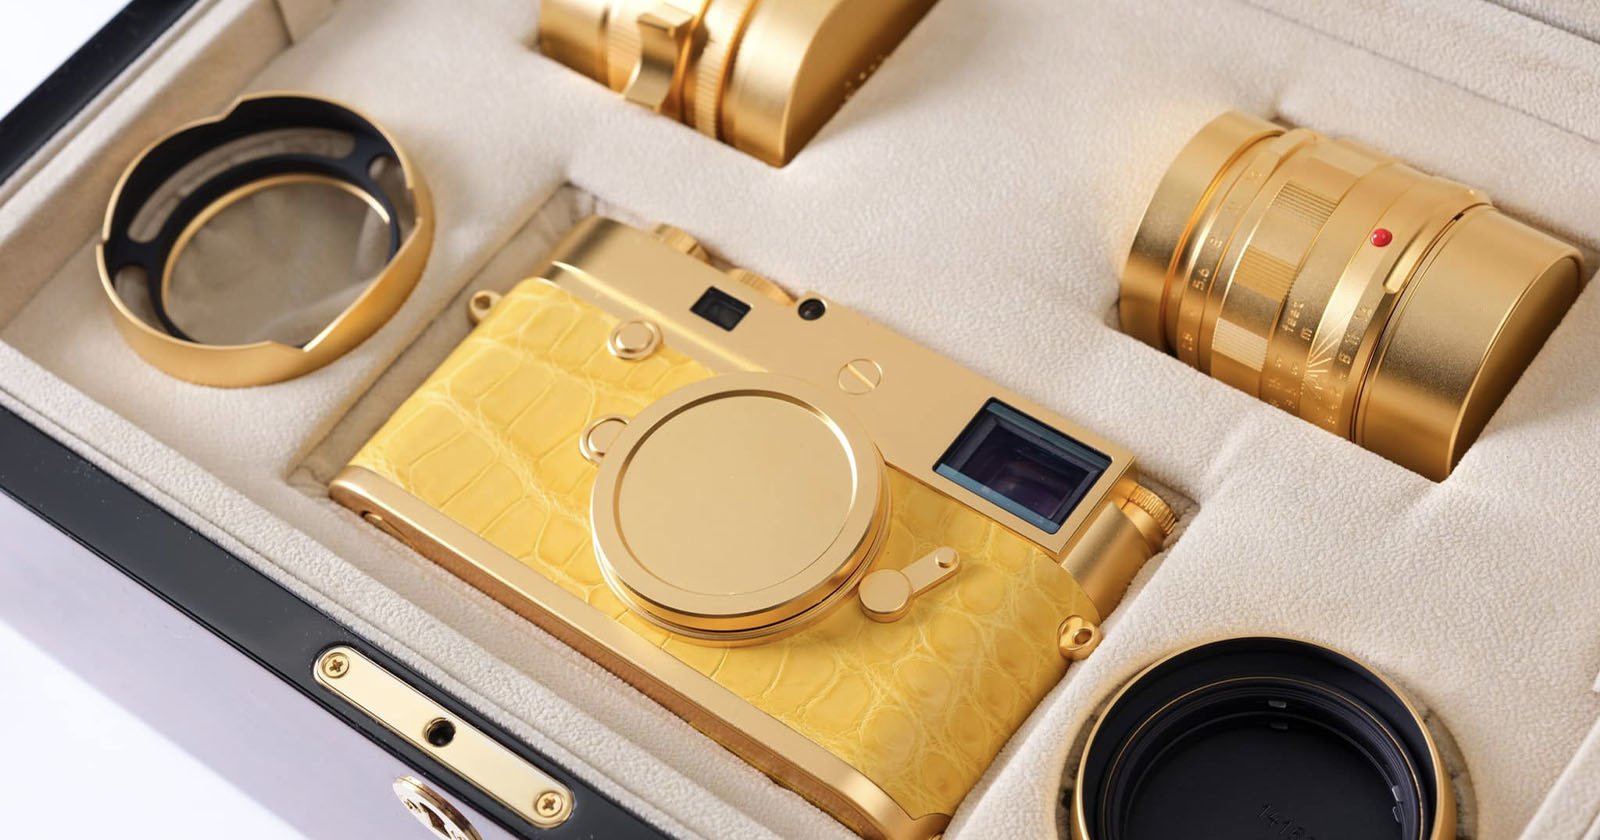 Limited Edition Gold Leica M6 Being Released in Honor of the Thai King